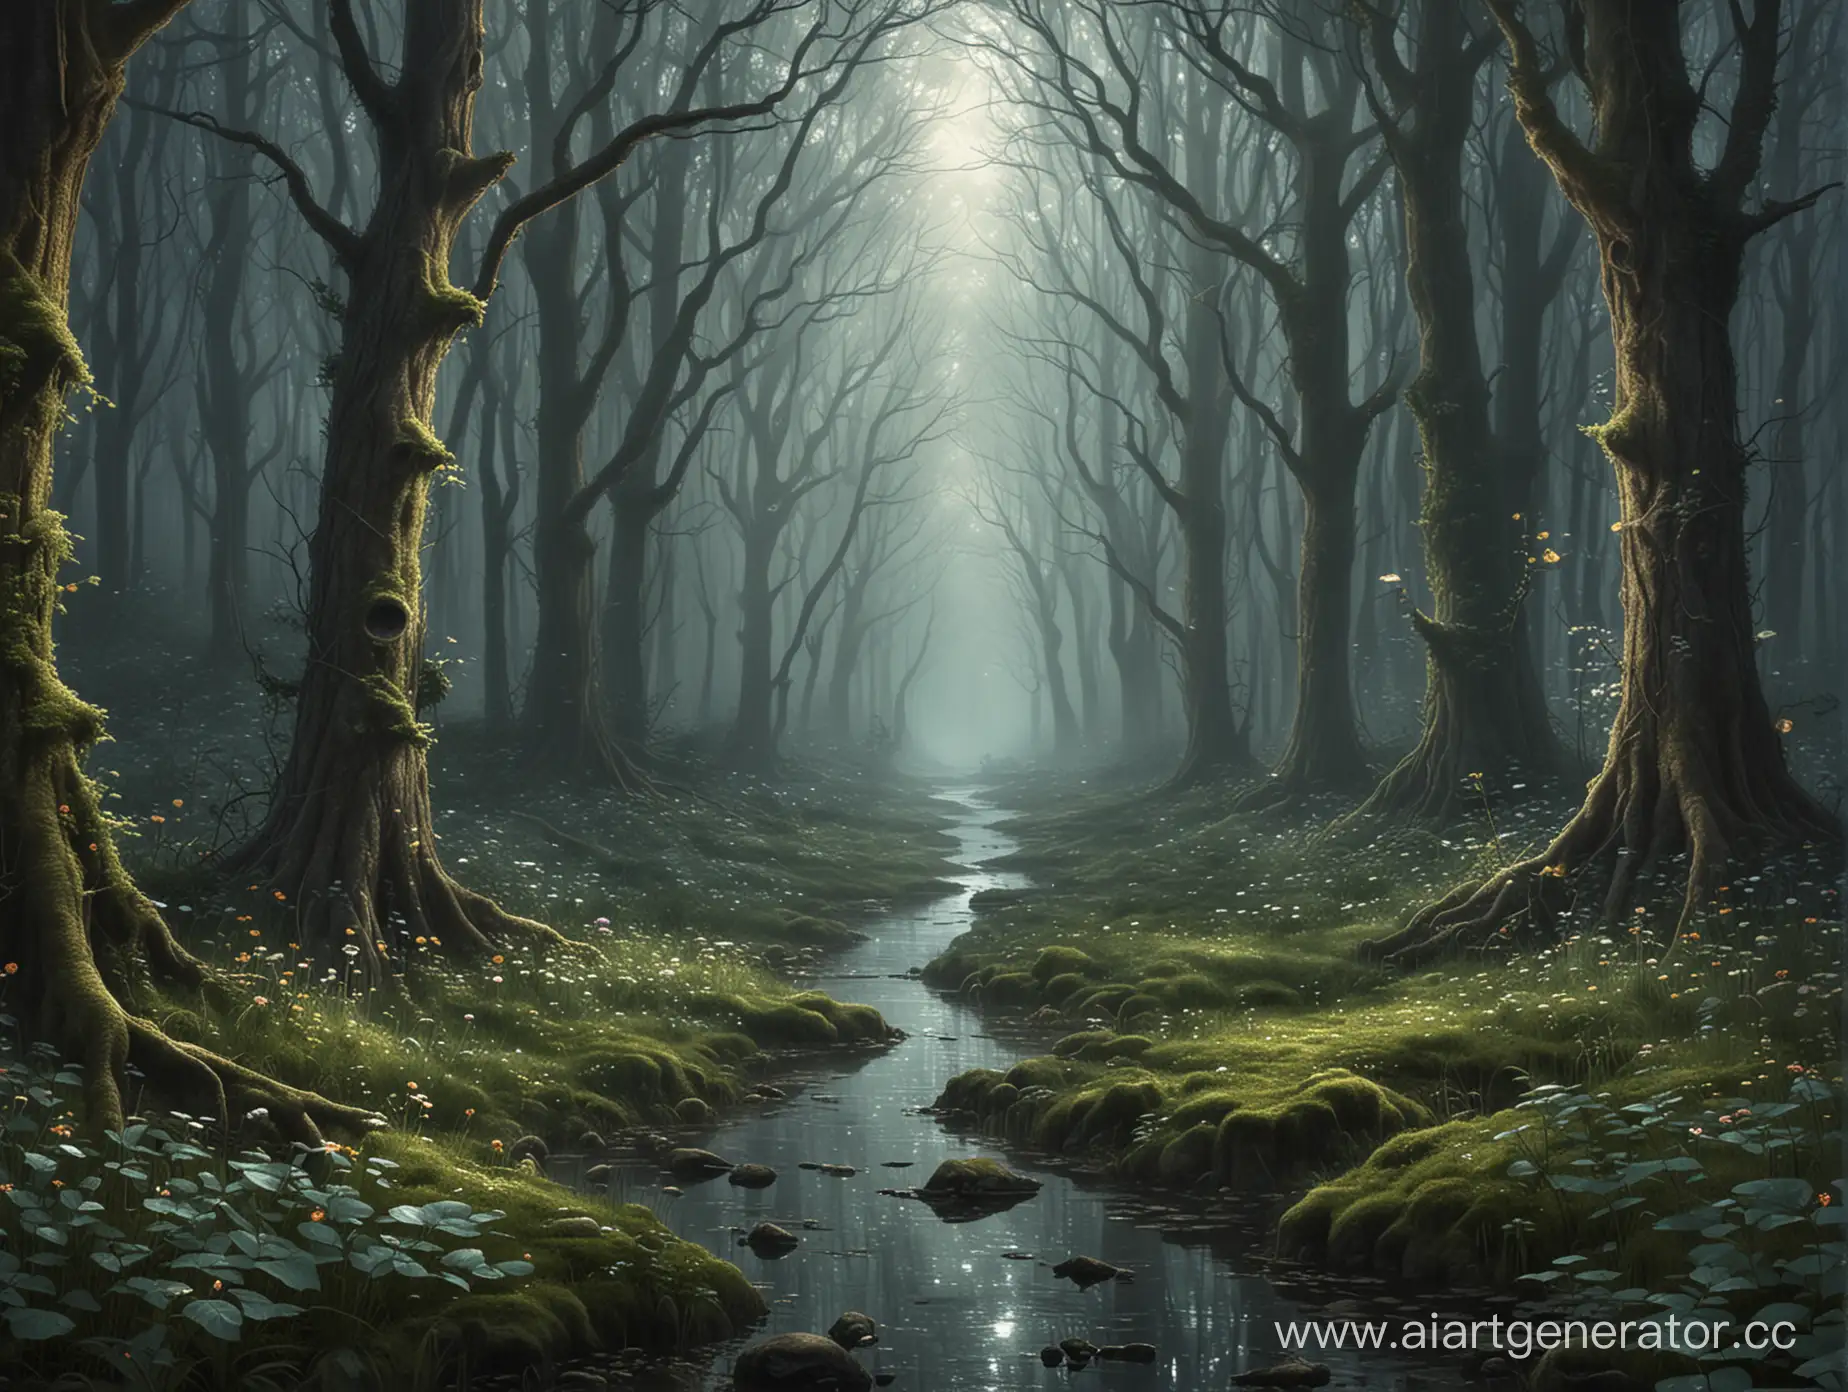 Enchanting-Melody-Fairytale-Forest-in-a-Gloomy-Ambiance